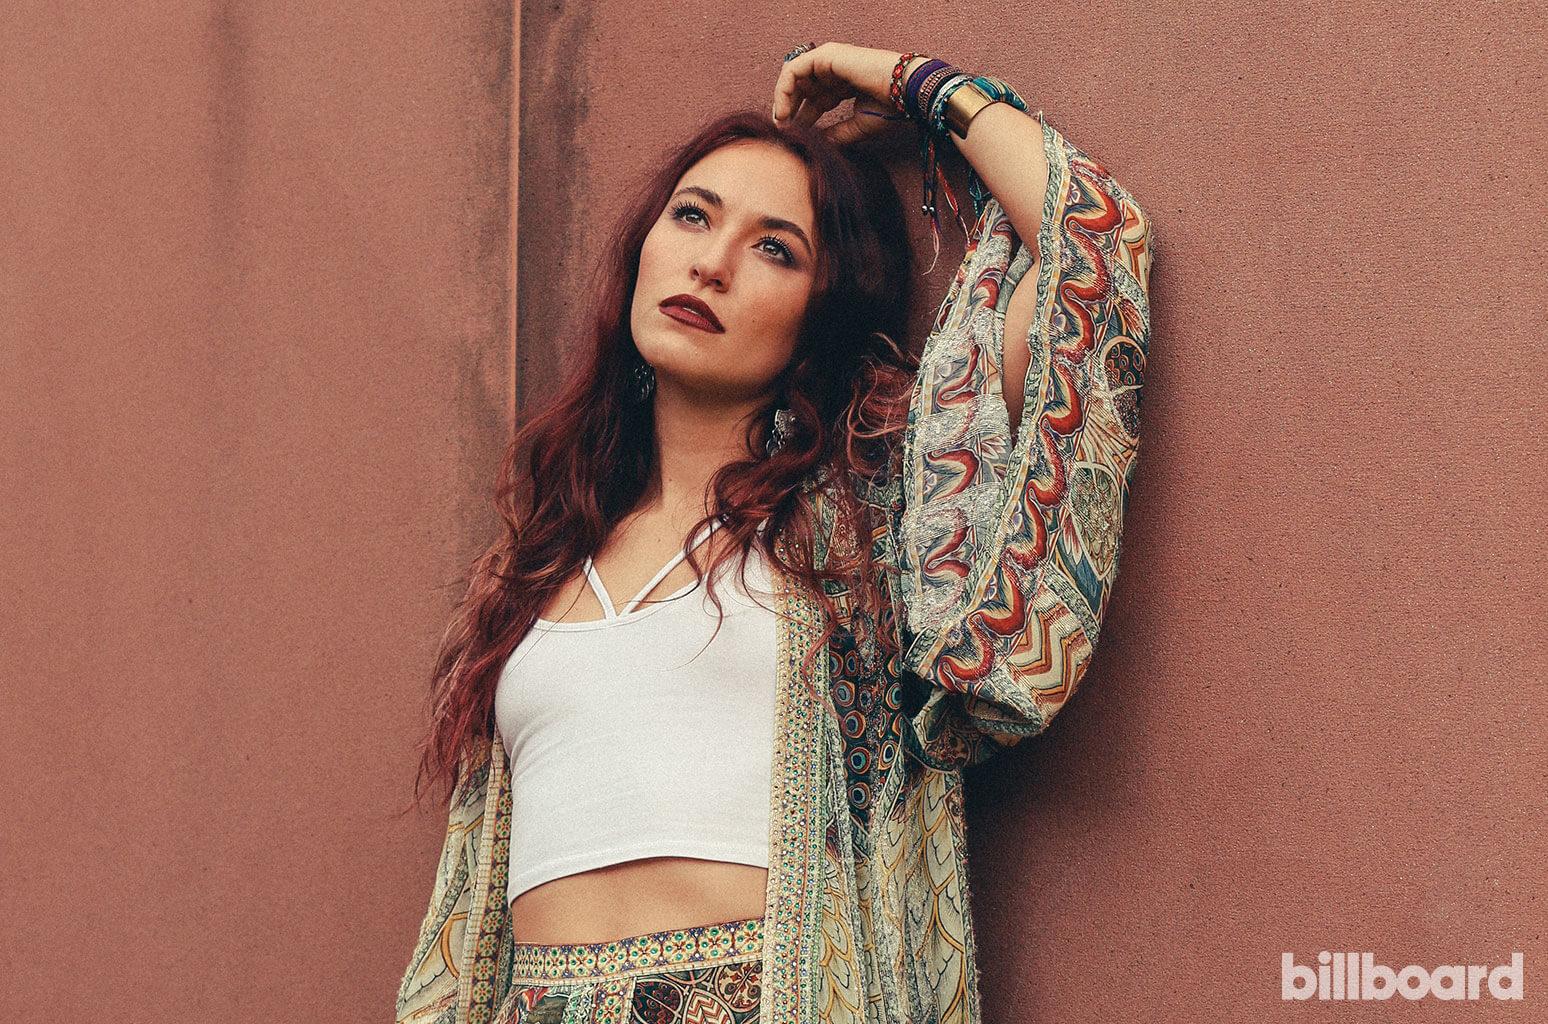 Lauren Daigle Hot Picture Are Too Delicious For All Her Fans